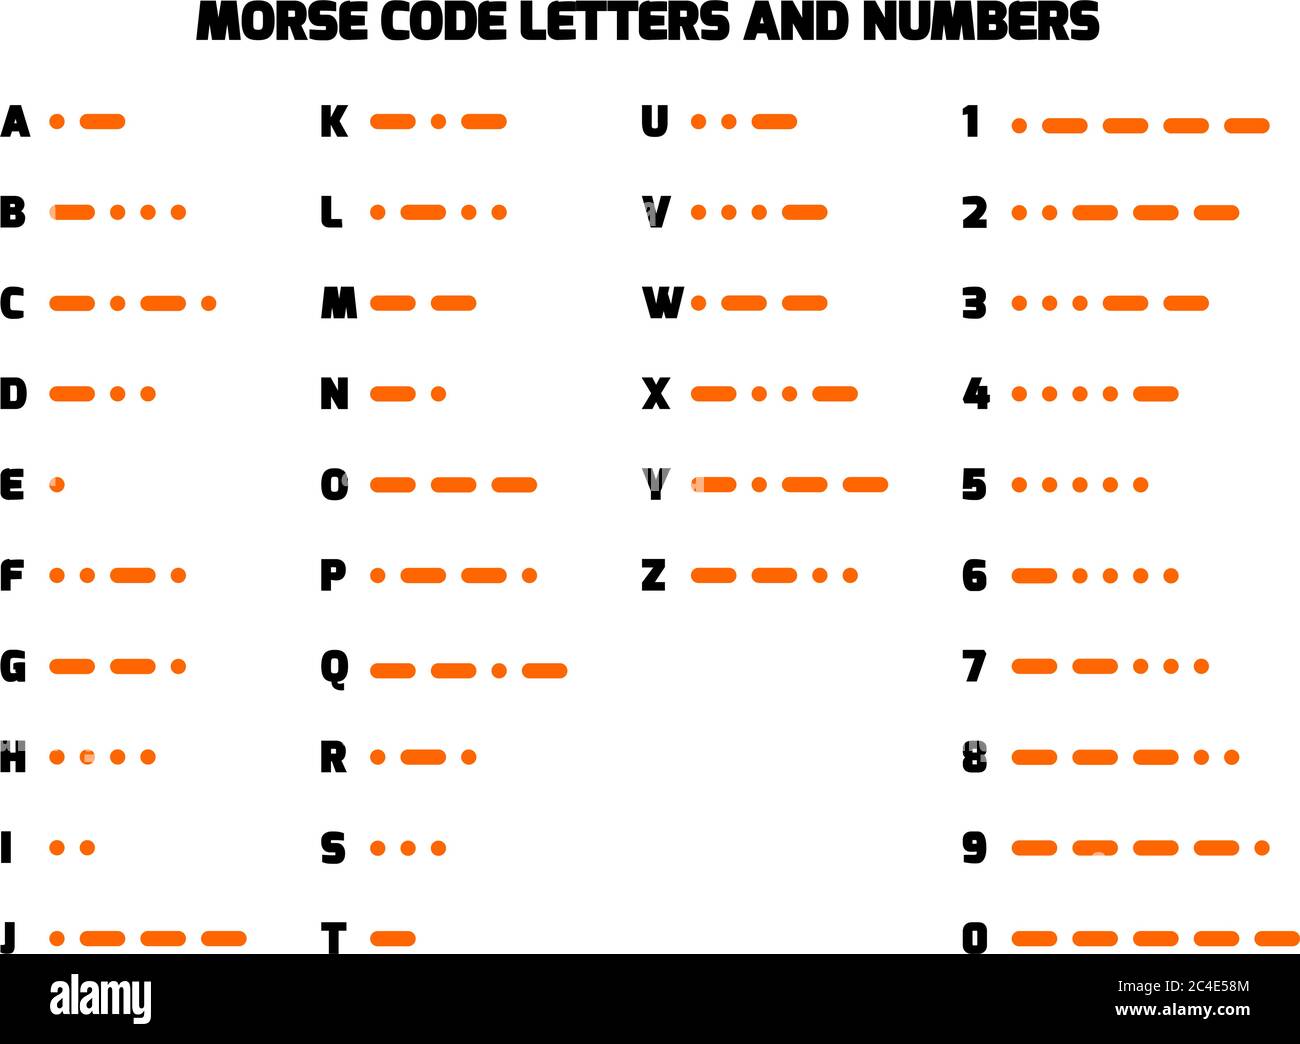 International Morse Code Alphabet. Set of encoded letters and numbers to dots and dashes. Used in radio or light communication. Vector illustration Stock Vector